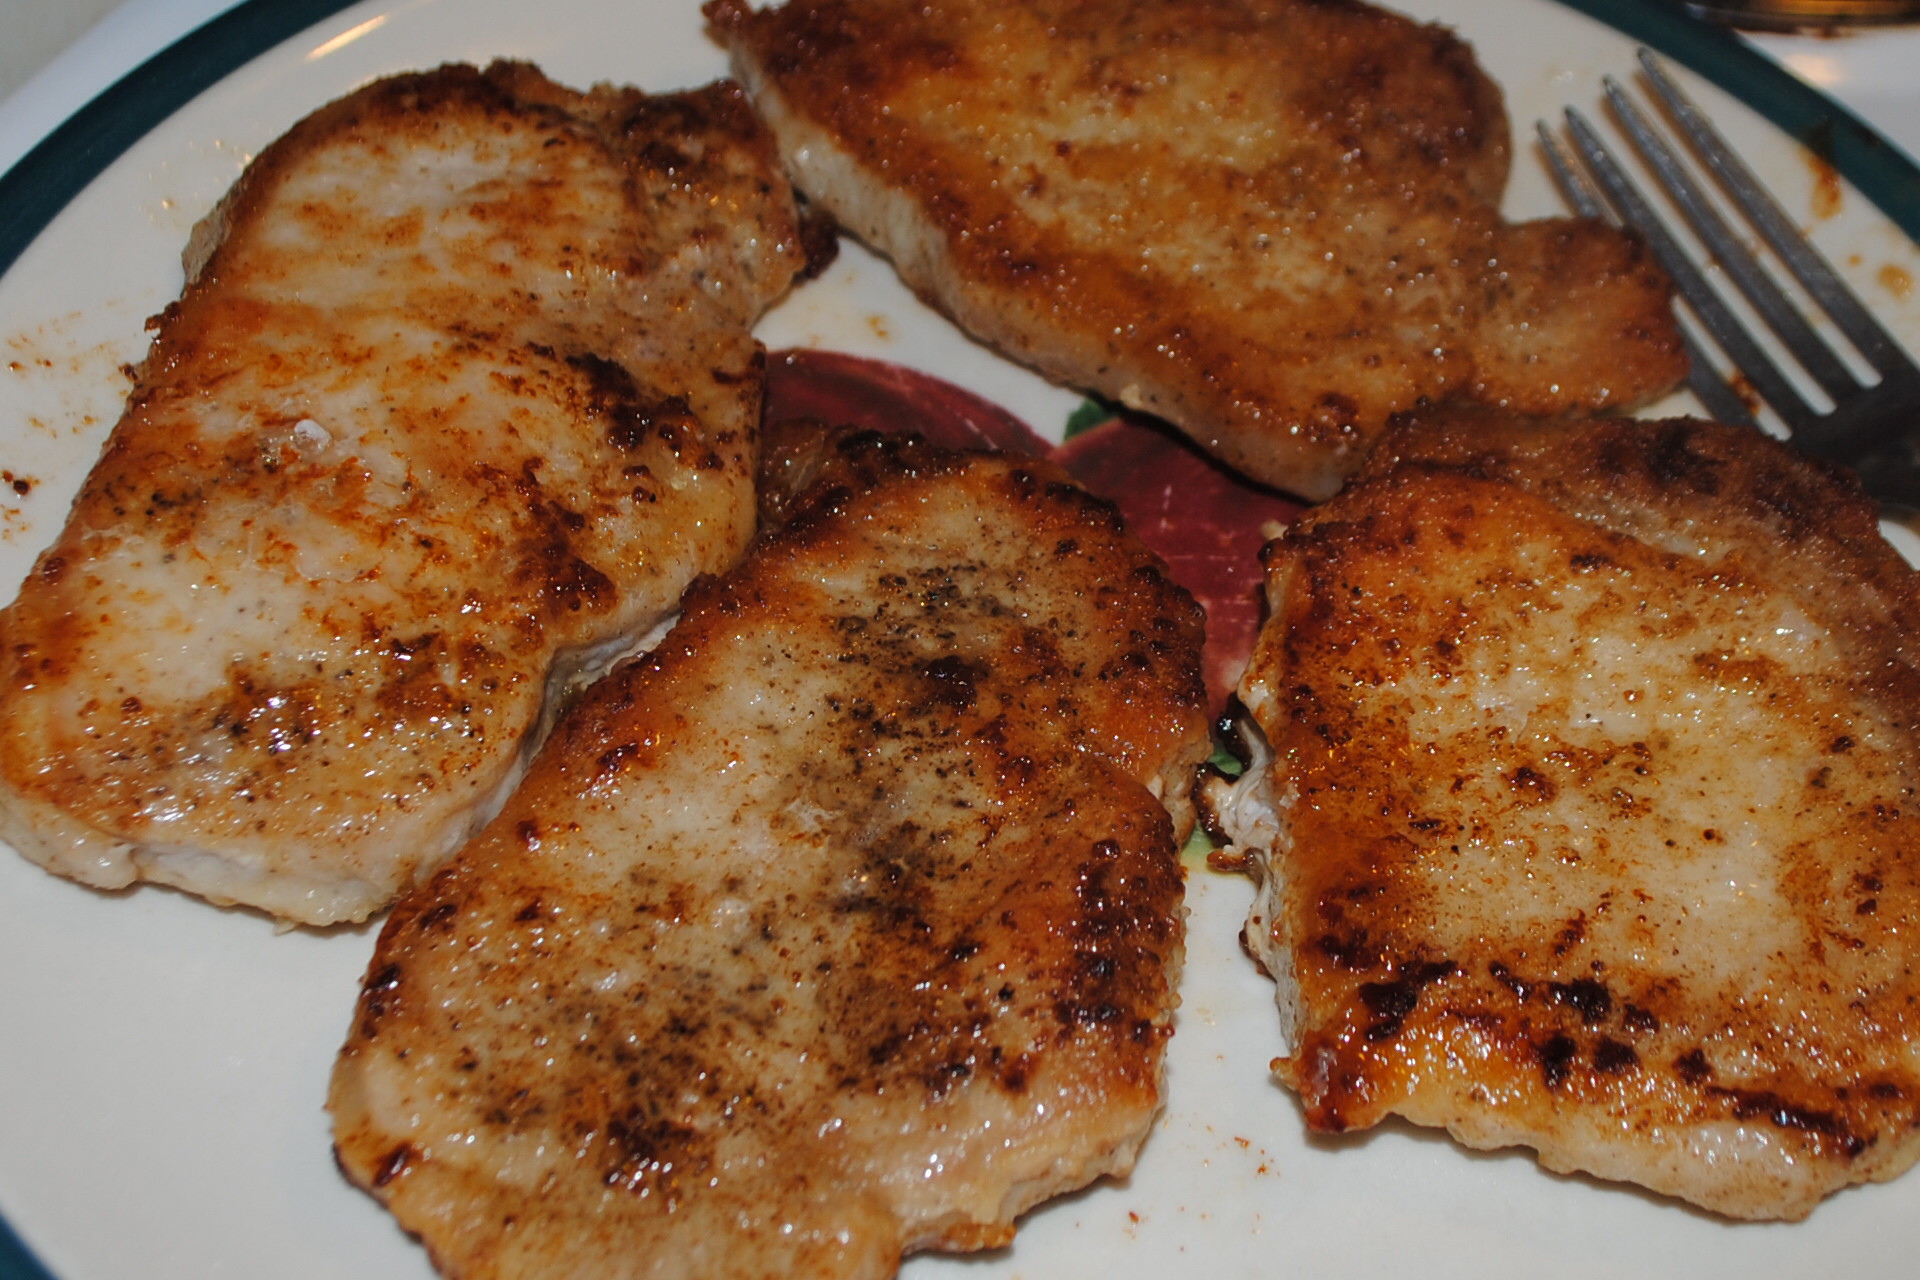 SAUTEED BONELESS PORK CHOPS WITH A EASY CORN STUFFING